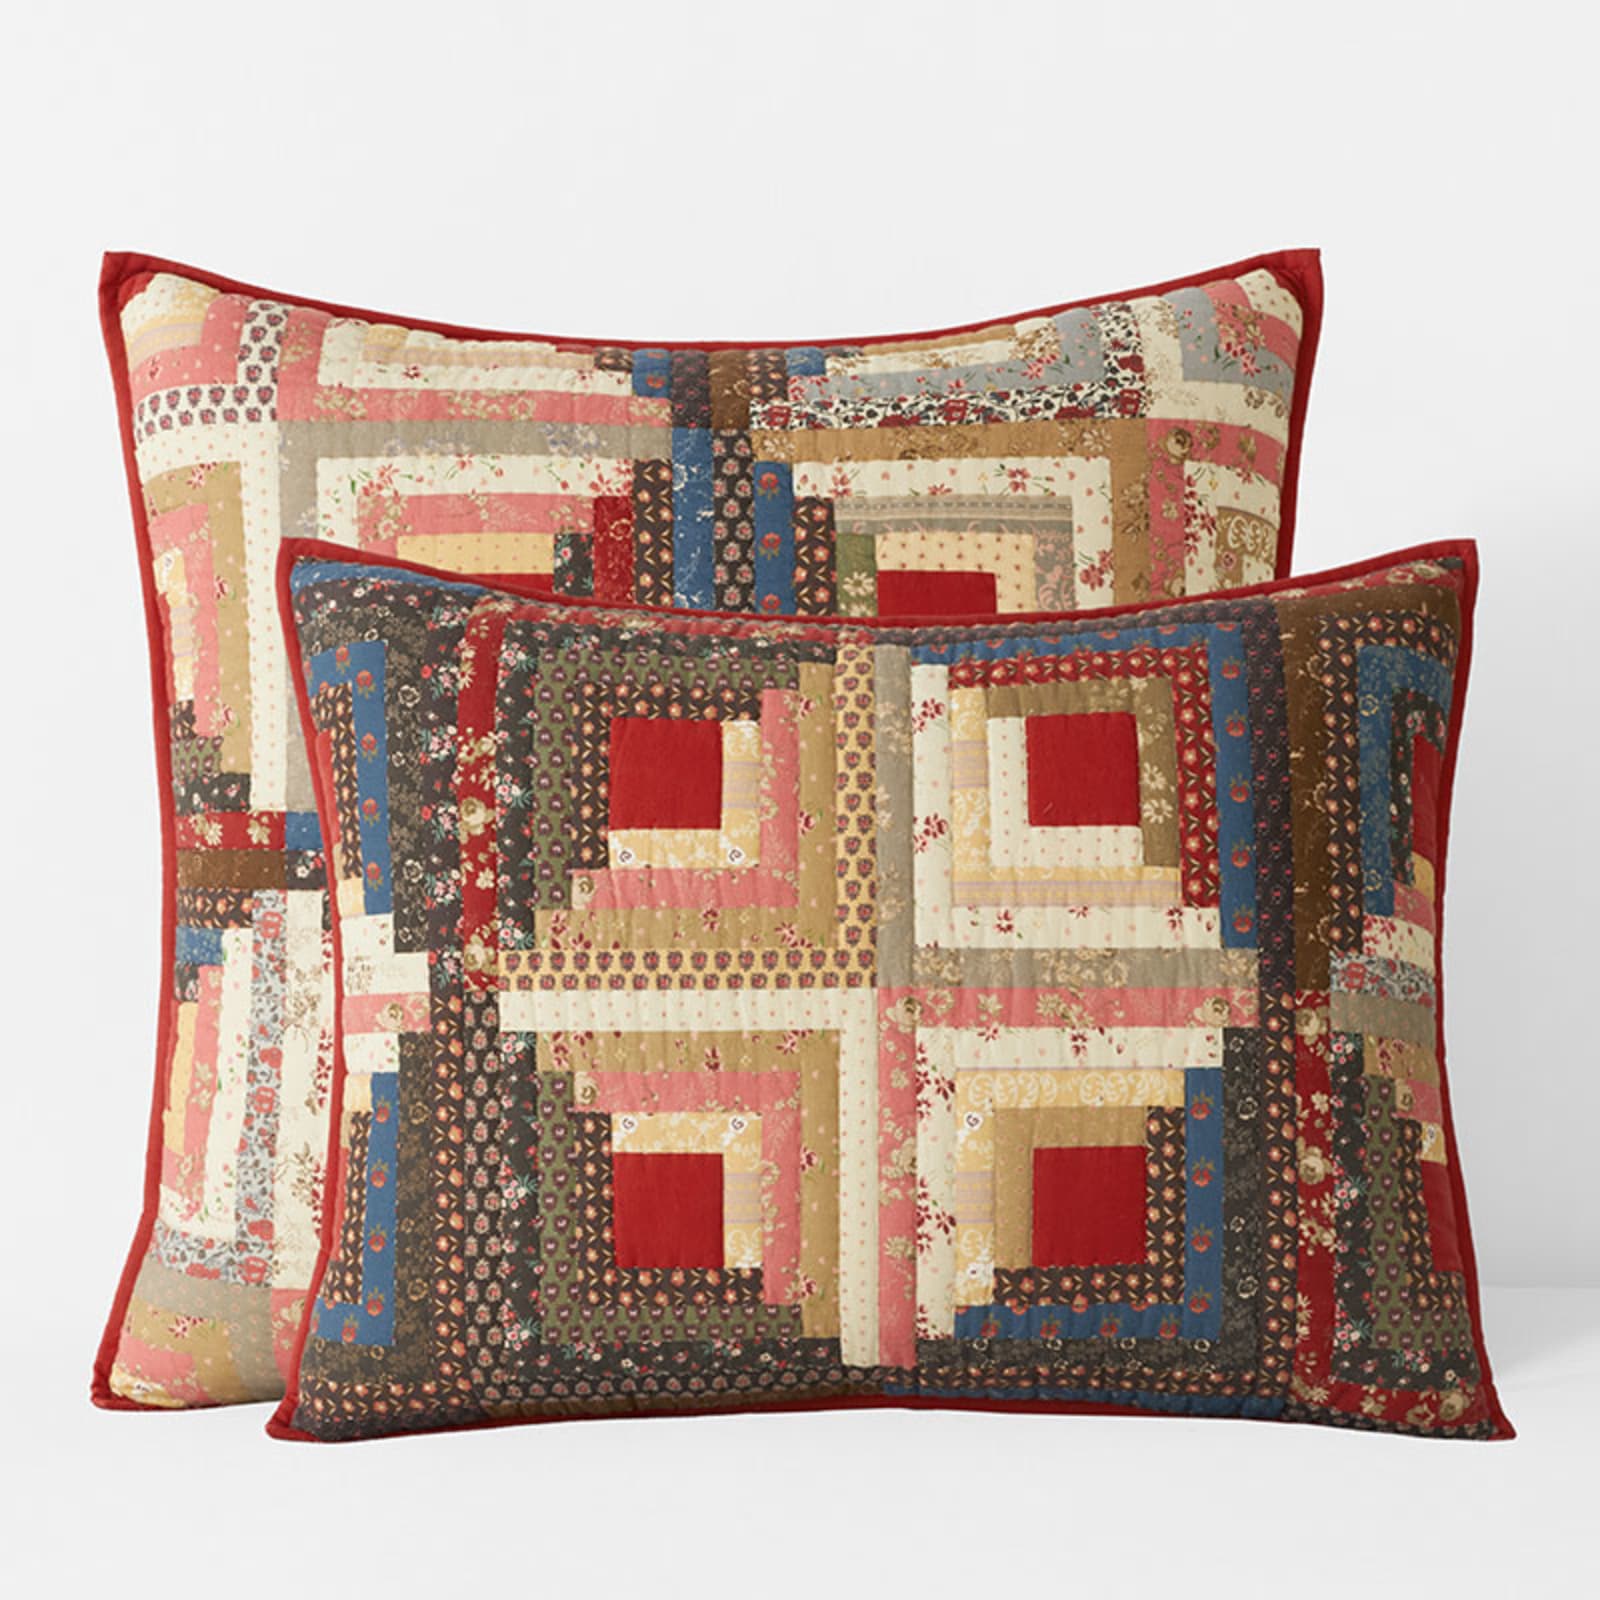 Quilted Pillow Shams 